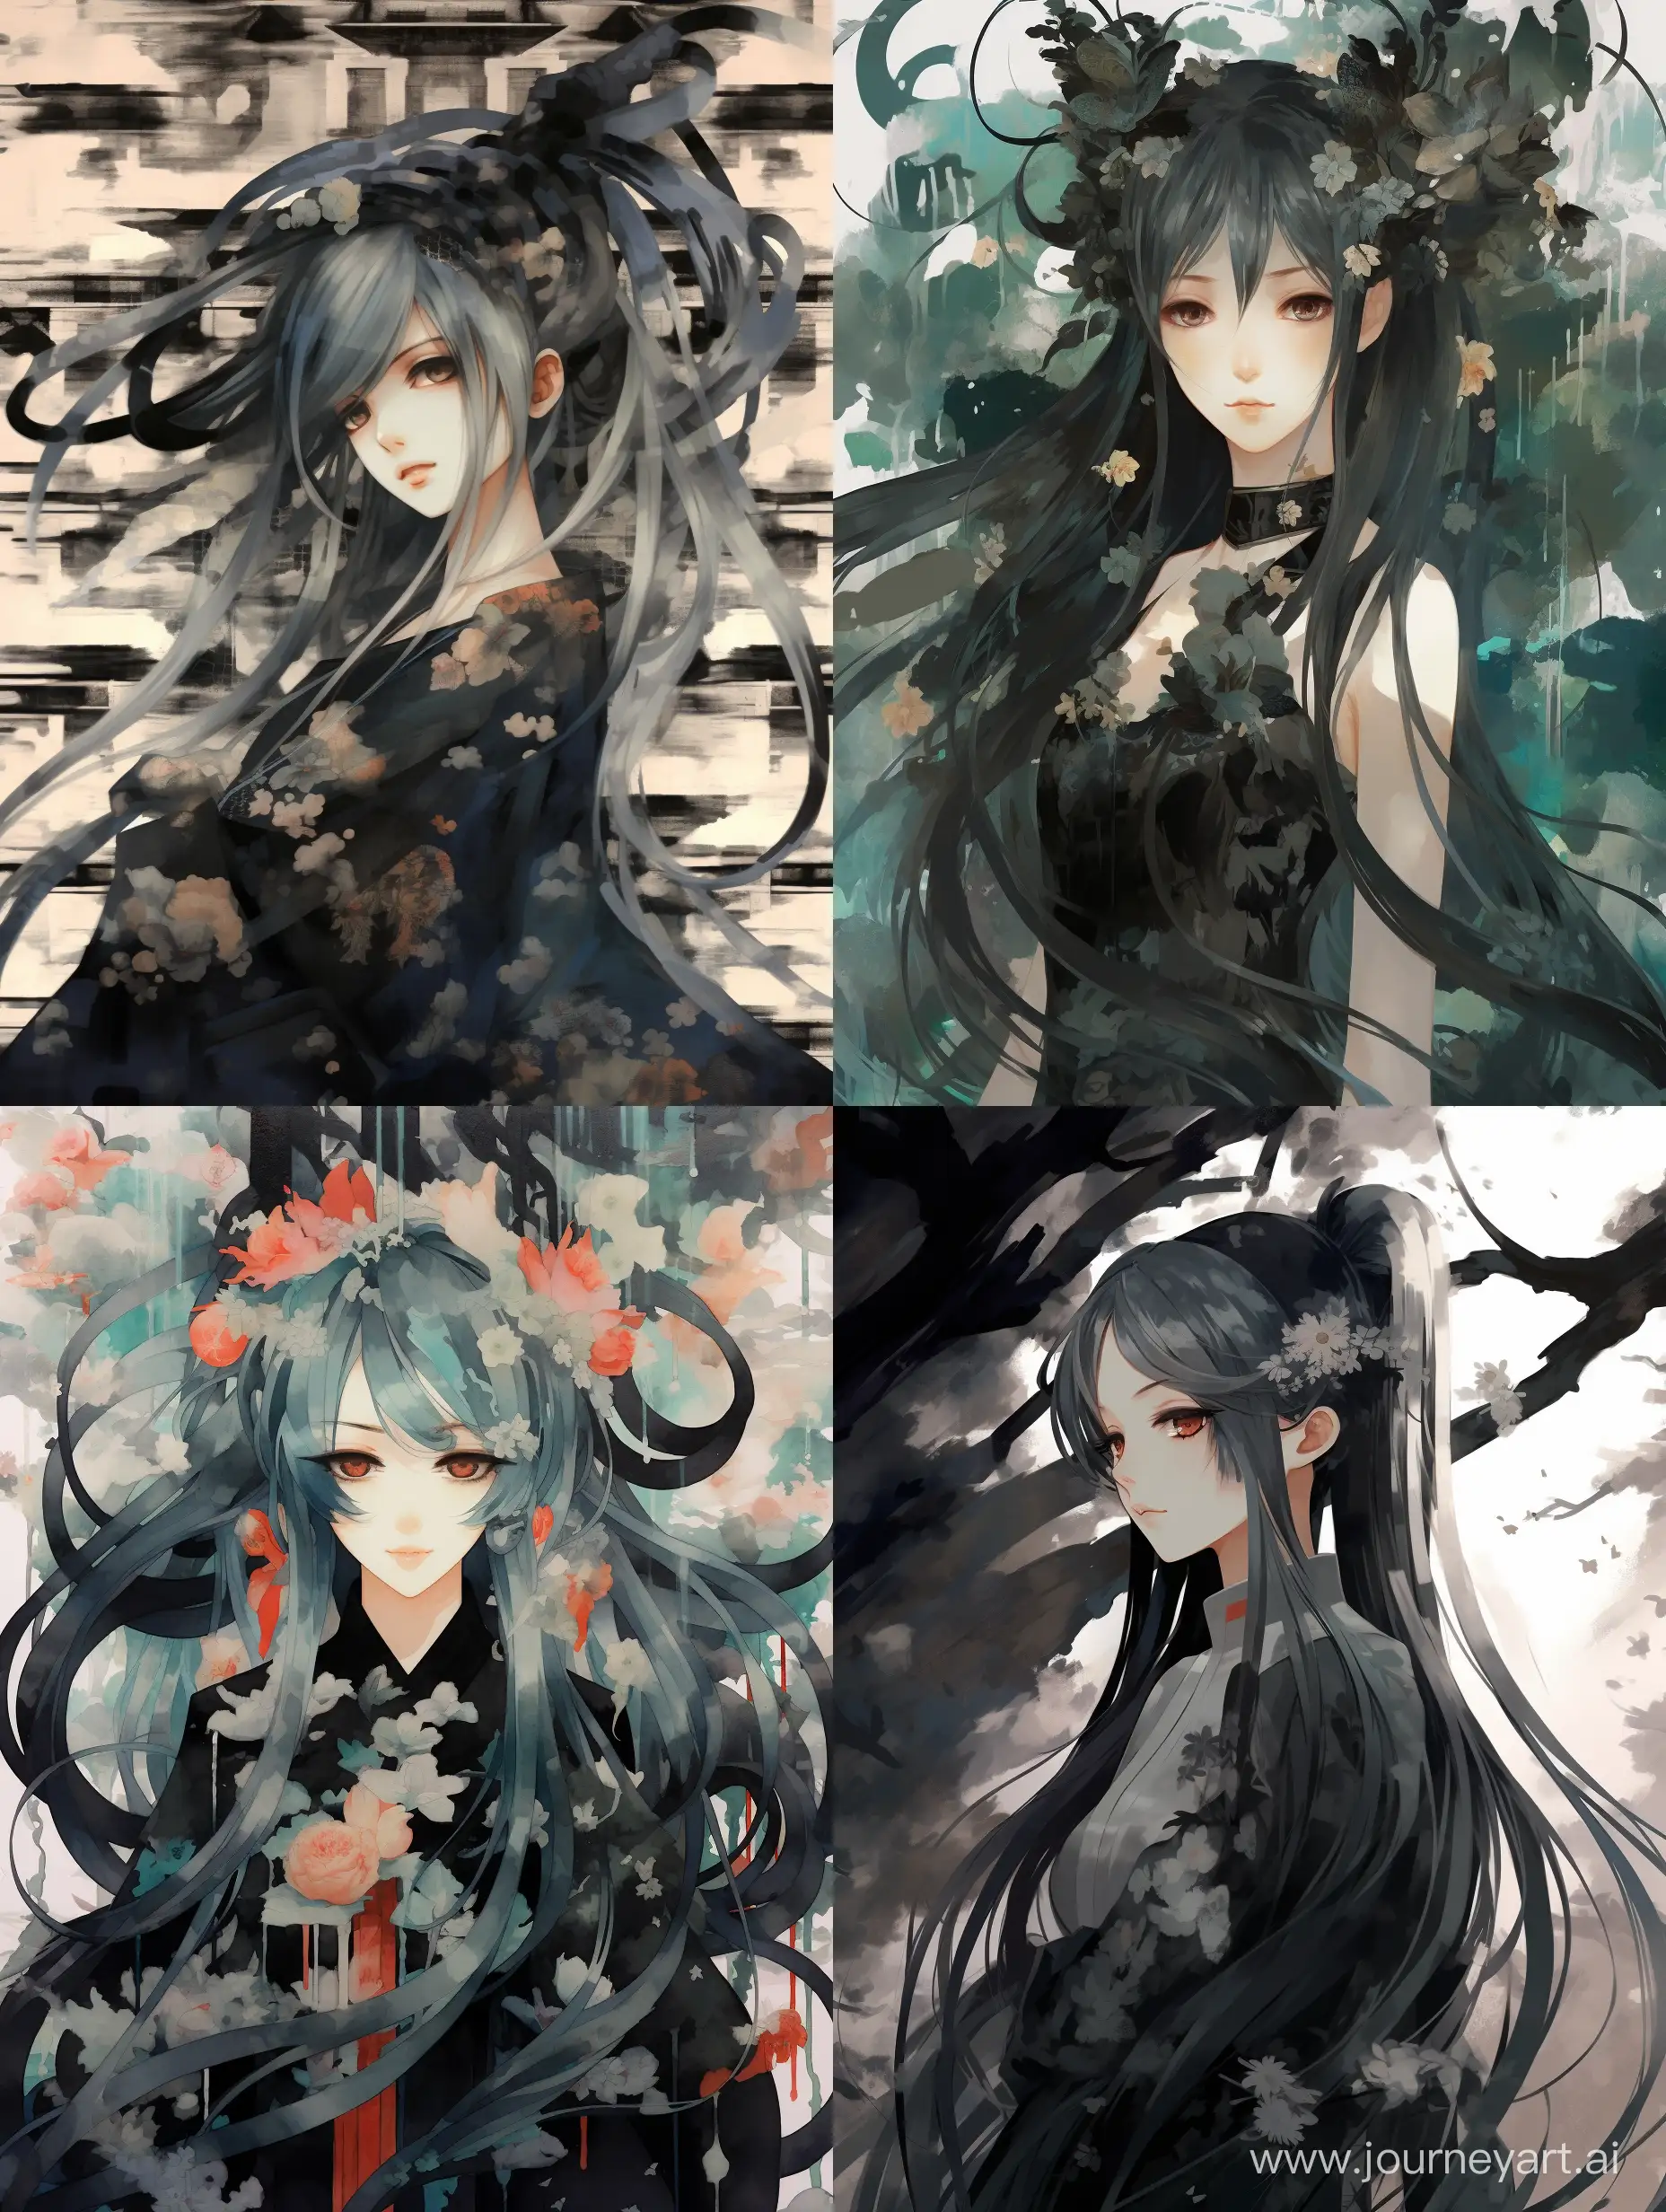 Hatsune miku but painted in an old black and white Chinese painting 